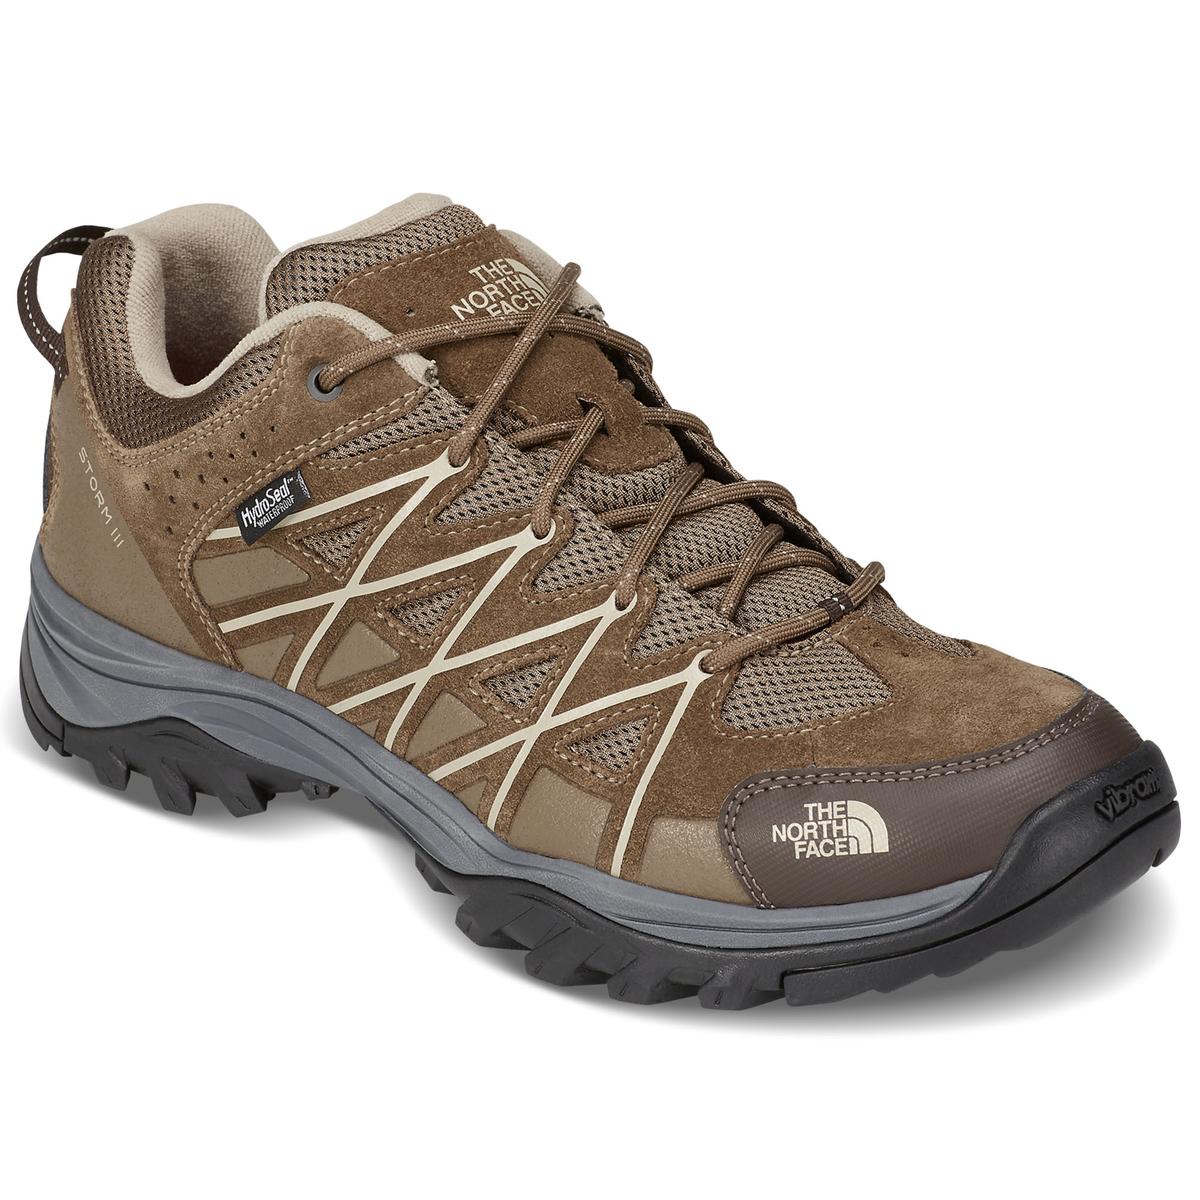 The North Face Men's Storm III Waterproof Hiking Shoes - Sun & Ski Sports